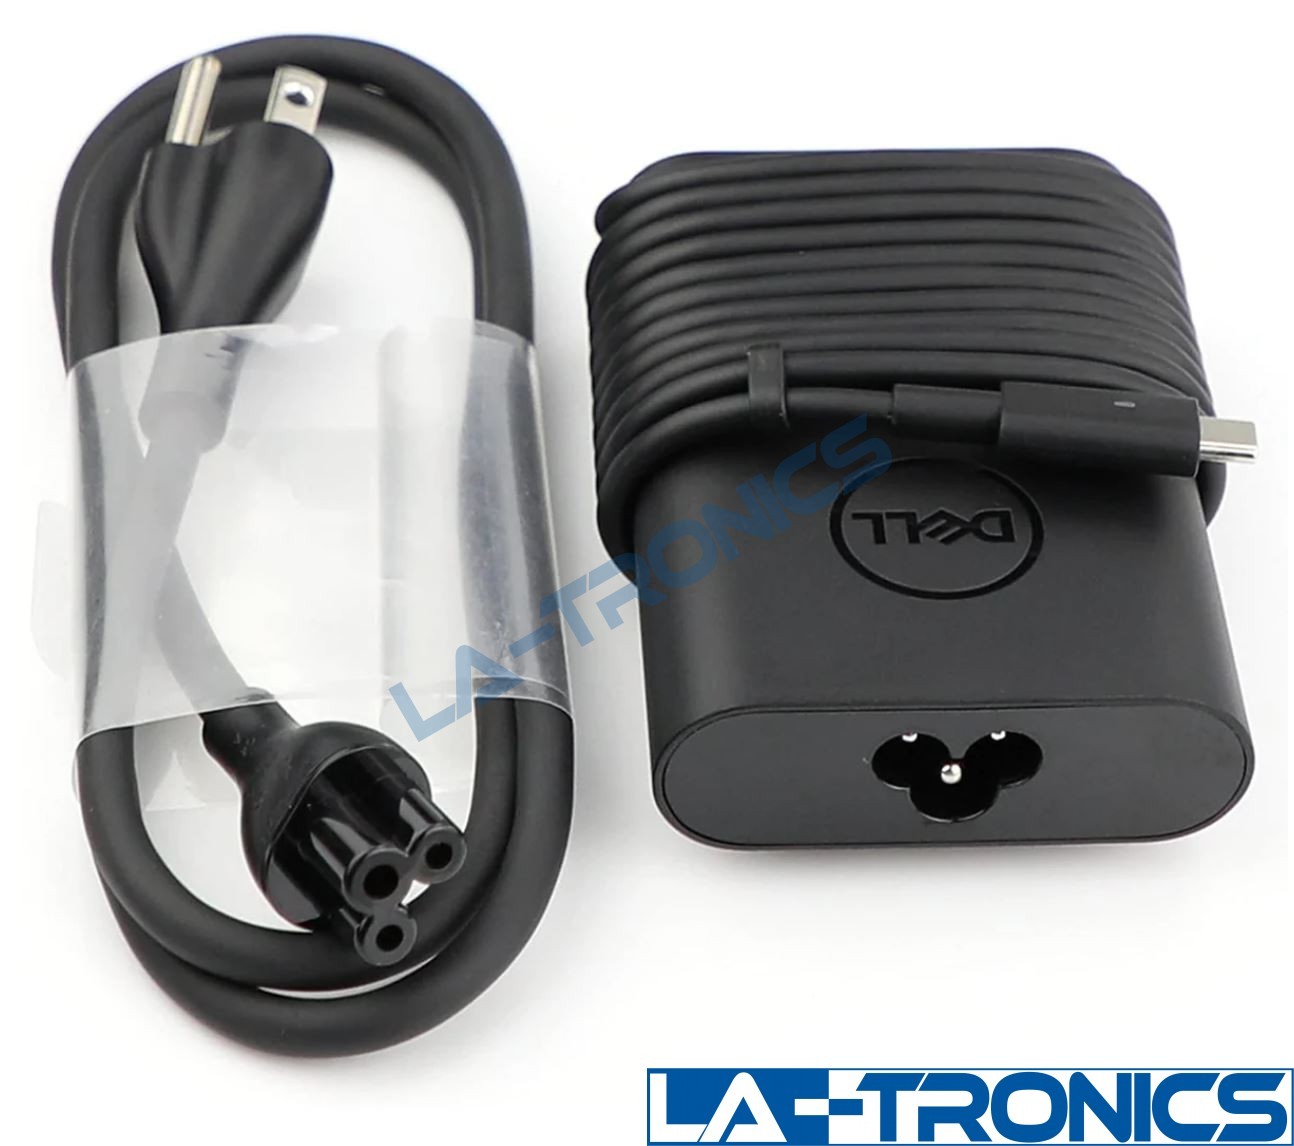 Genuine Dell 65w Type C Laptop Charger USB C Power Adapter For VENUE 10 PRO 5056